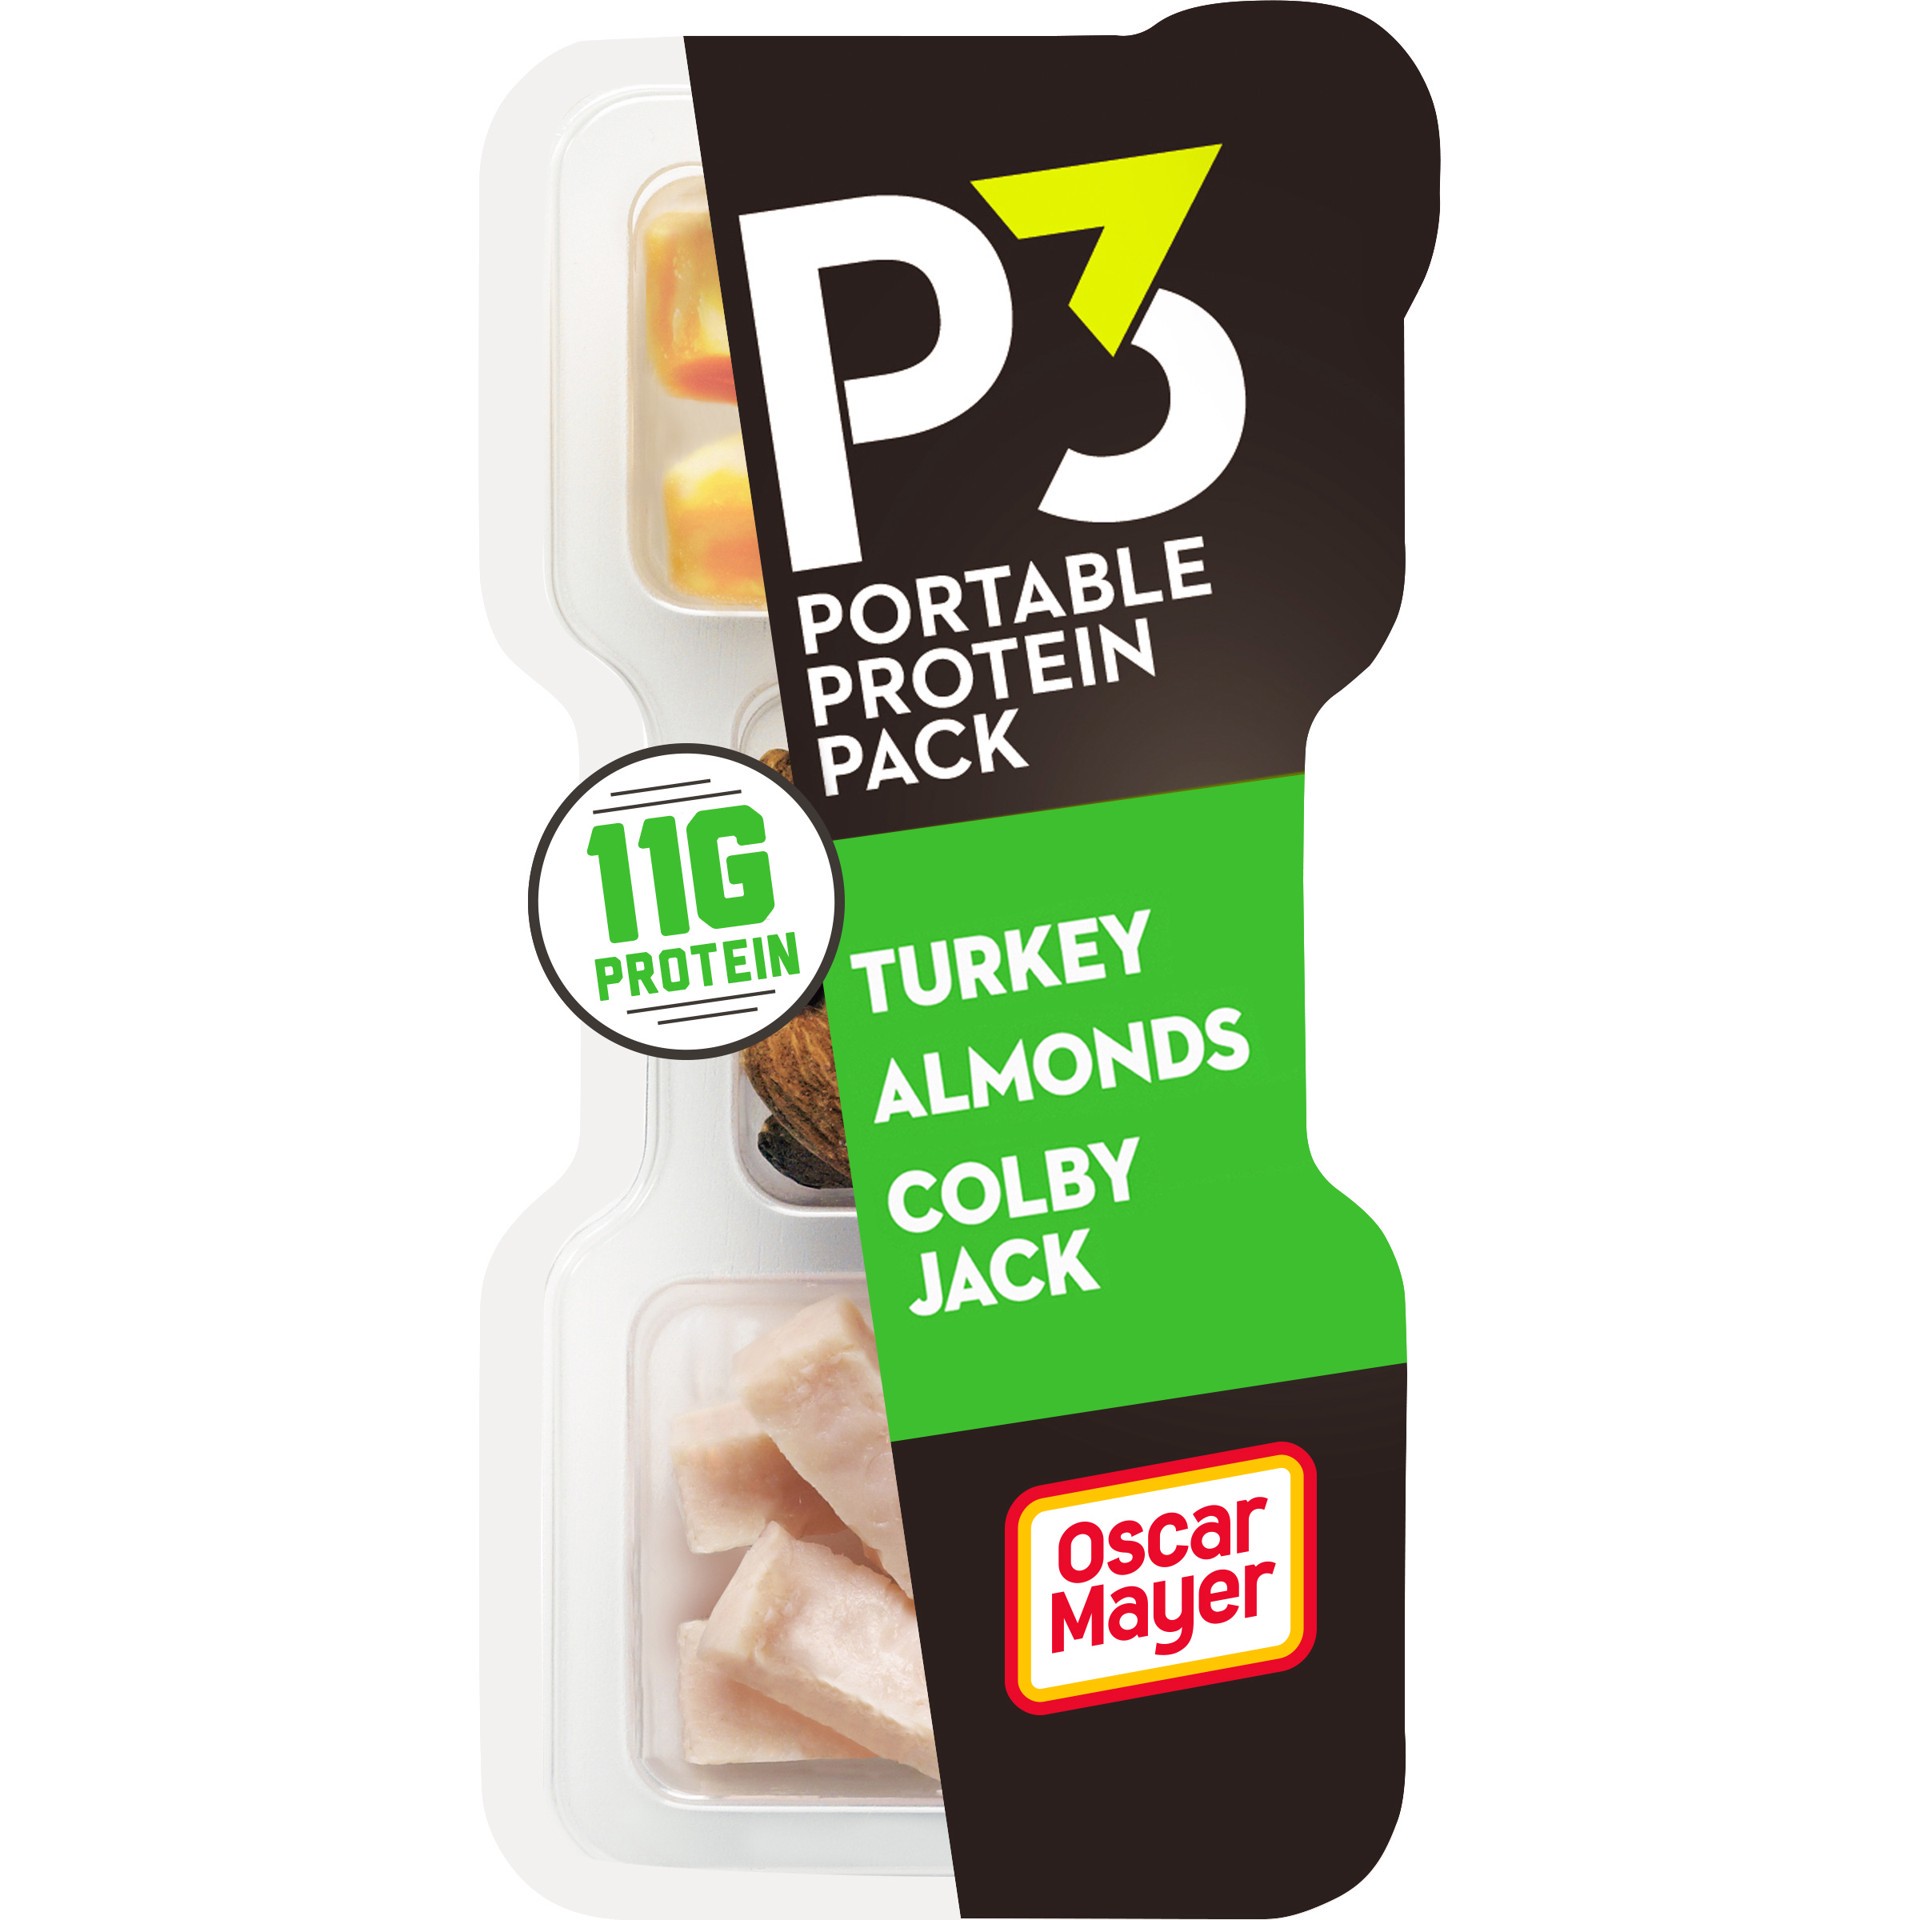 slide 1 of 5, P3 Portable Protein Snack Pack with Turkey, Almonds & Colby Jack Cheese Tray, 2 oz